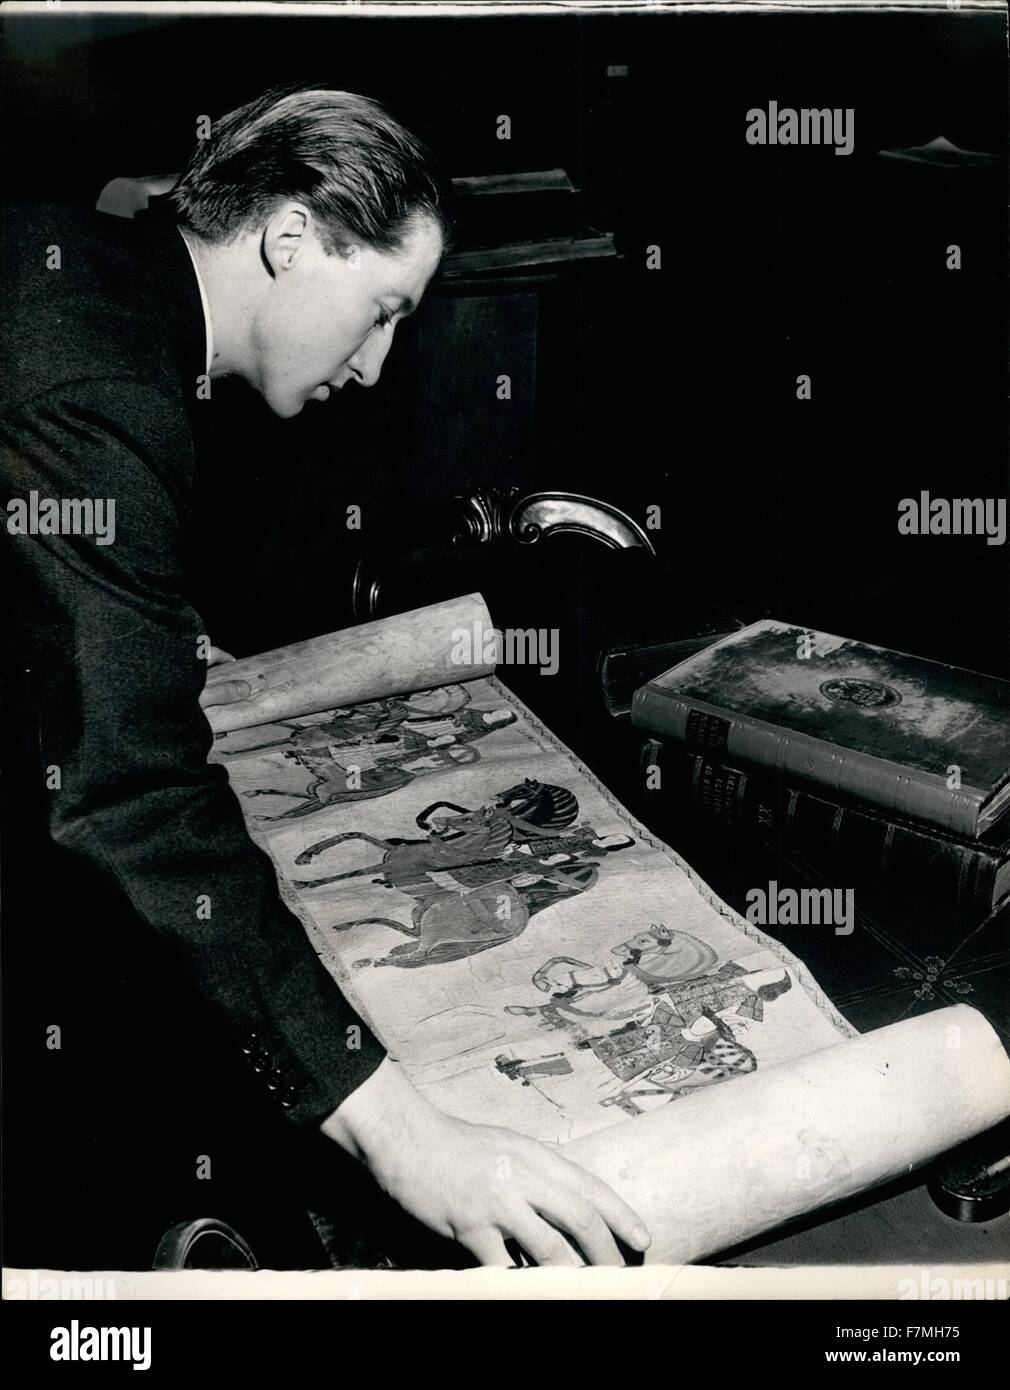 1953 - College of Arms: Mr. Robin Mirrlees, Rouge Dragon Pursuivant examining a famous roll of arms almost unique of its kind. It is the Westminster Tournament Roll prepared for a tournament Henry VIII held in honour of his first wife, Catherine of Aragon. The portion visible shows the Heralds and Pursuivants of the day riding to officials at the event. They are seen wearing their tabards and holding their batons of offne. © Keystone Pictures USA/ZUMAPRESS.com/Alamy Live News Stock Photo